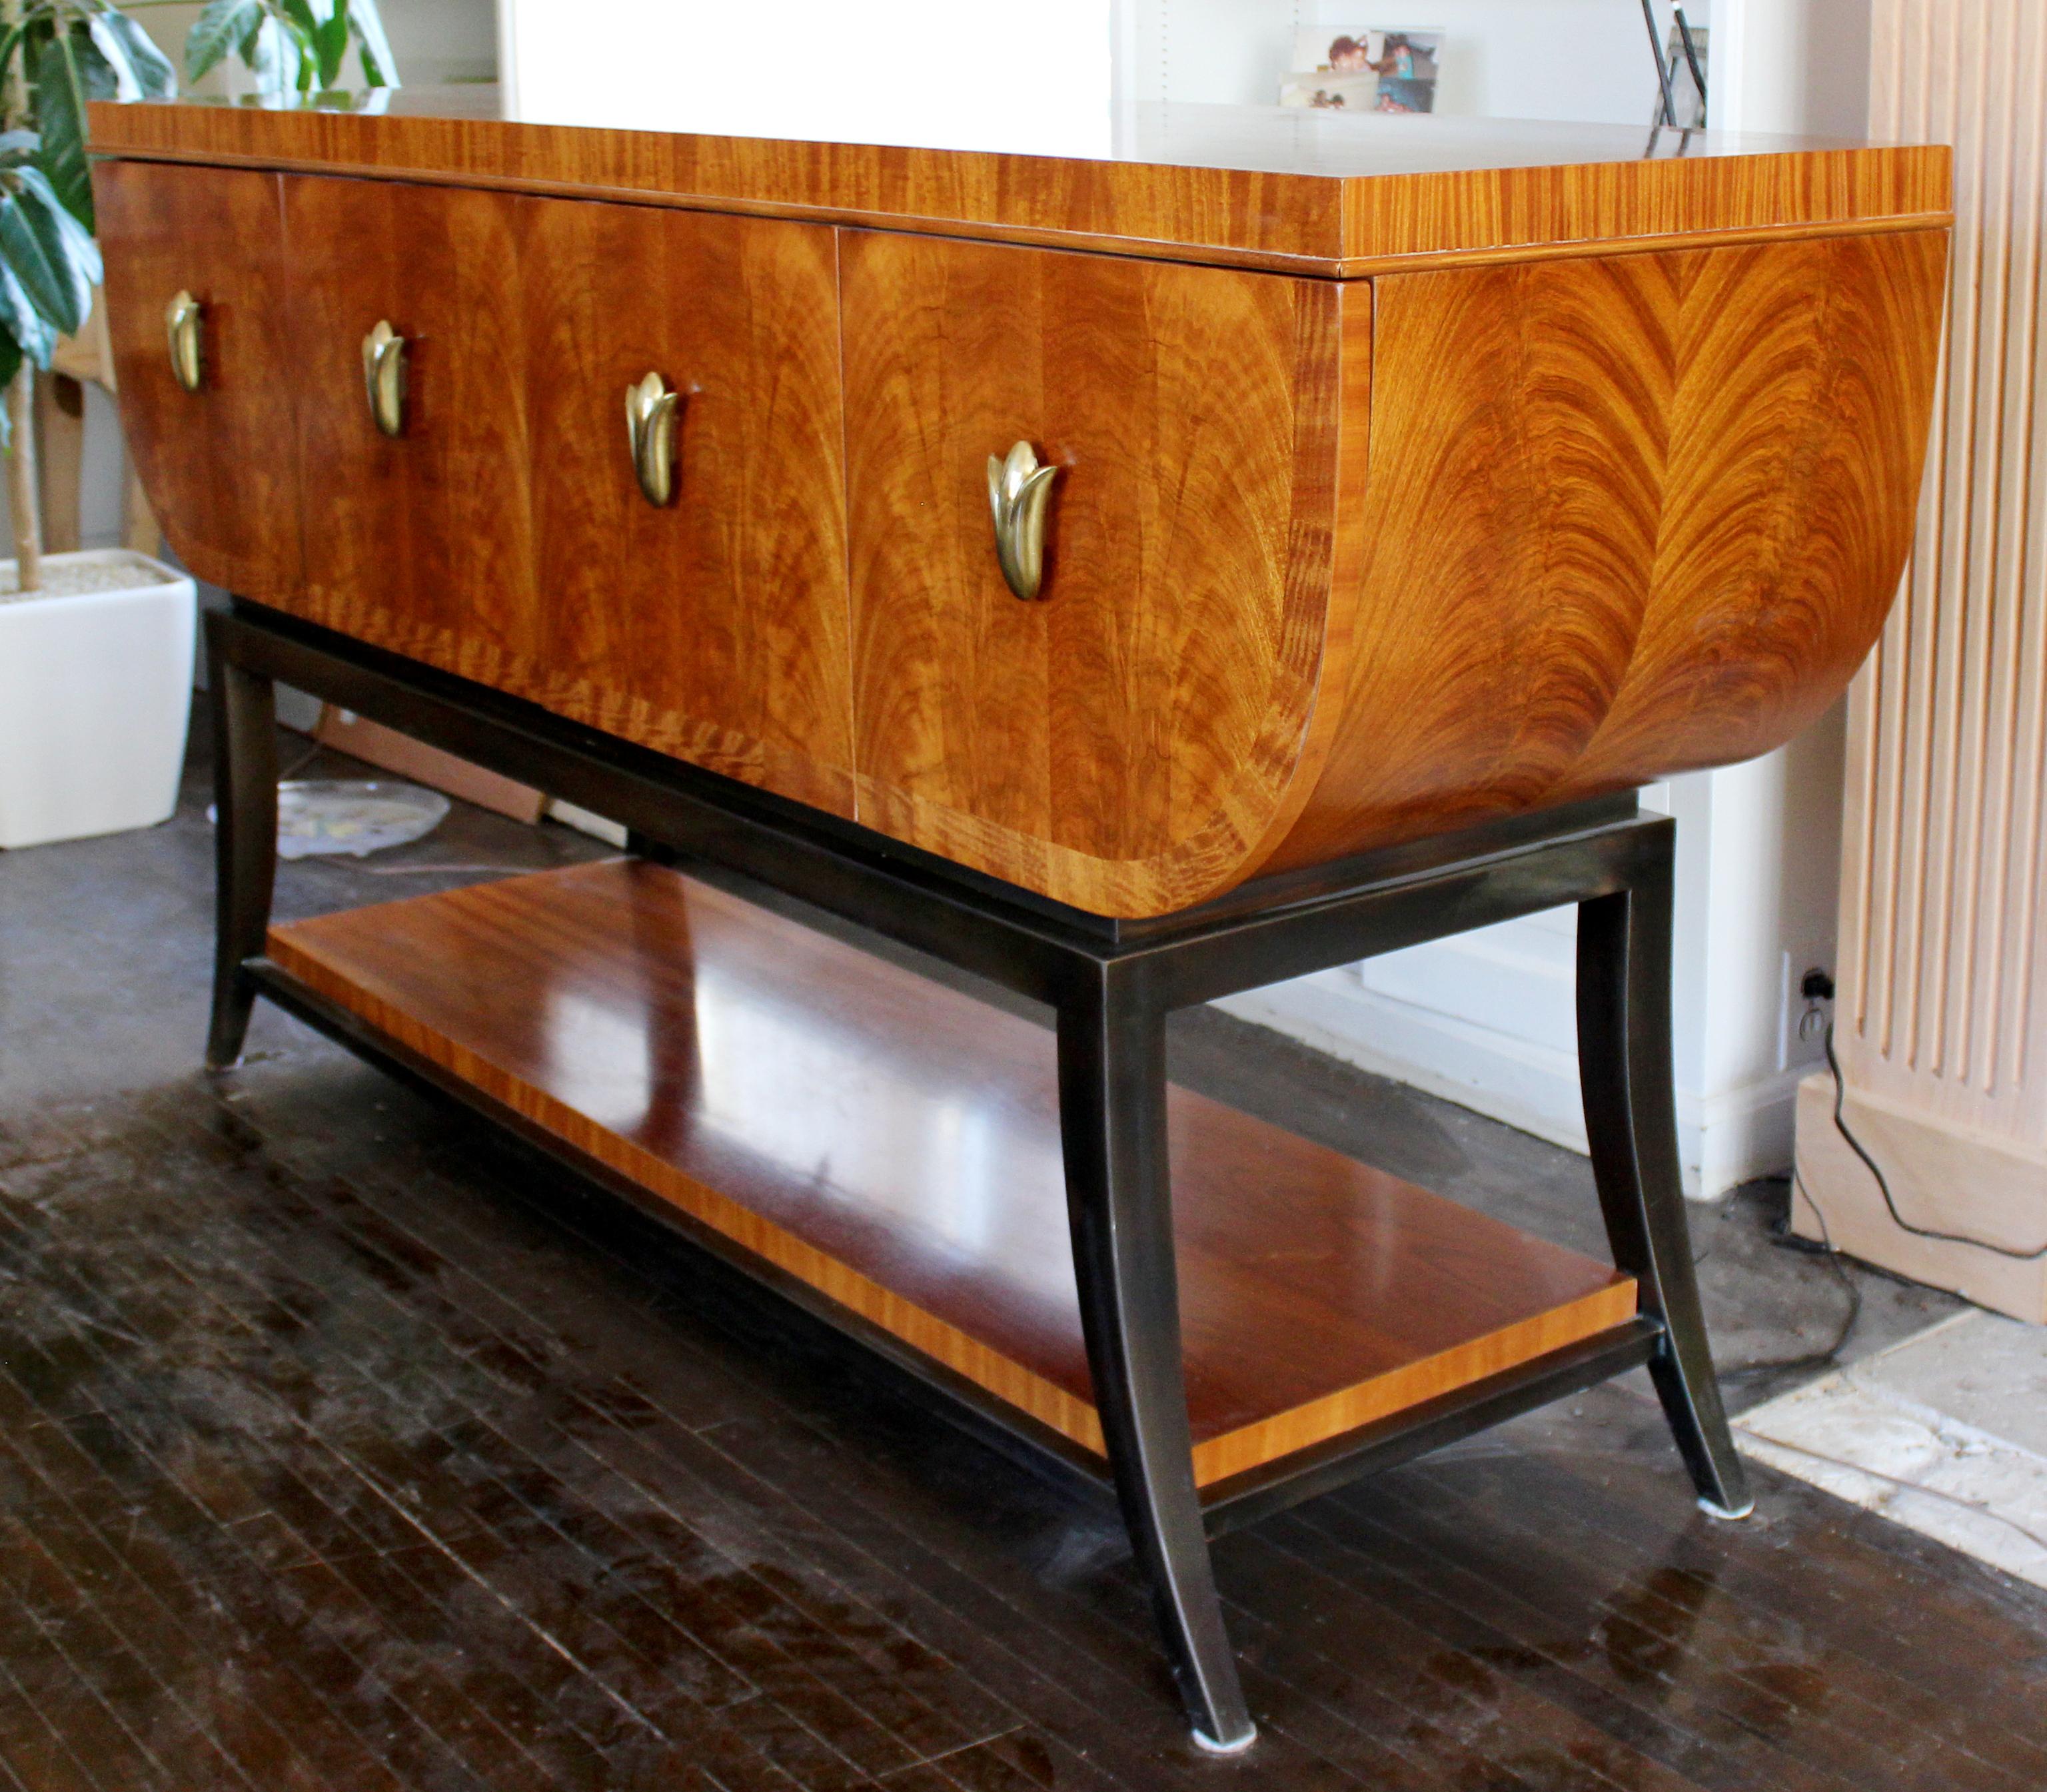 For your consideration is a spectacular, curved burl wood credenza, with three drawers and brass handles, by Henredon, circa 1990s. In excellent vintage condition. The dimensions are 72